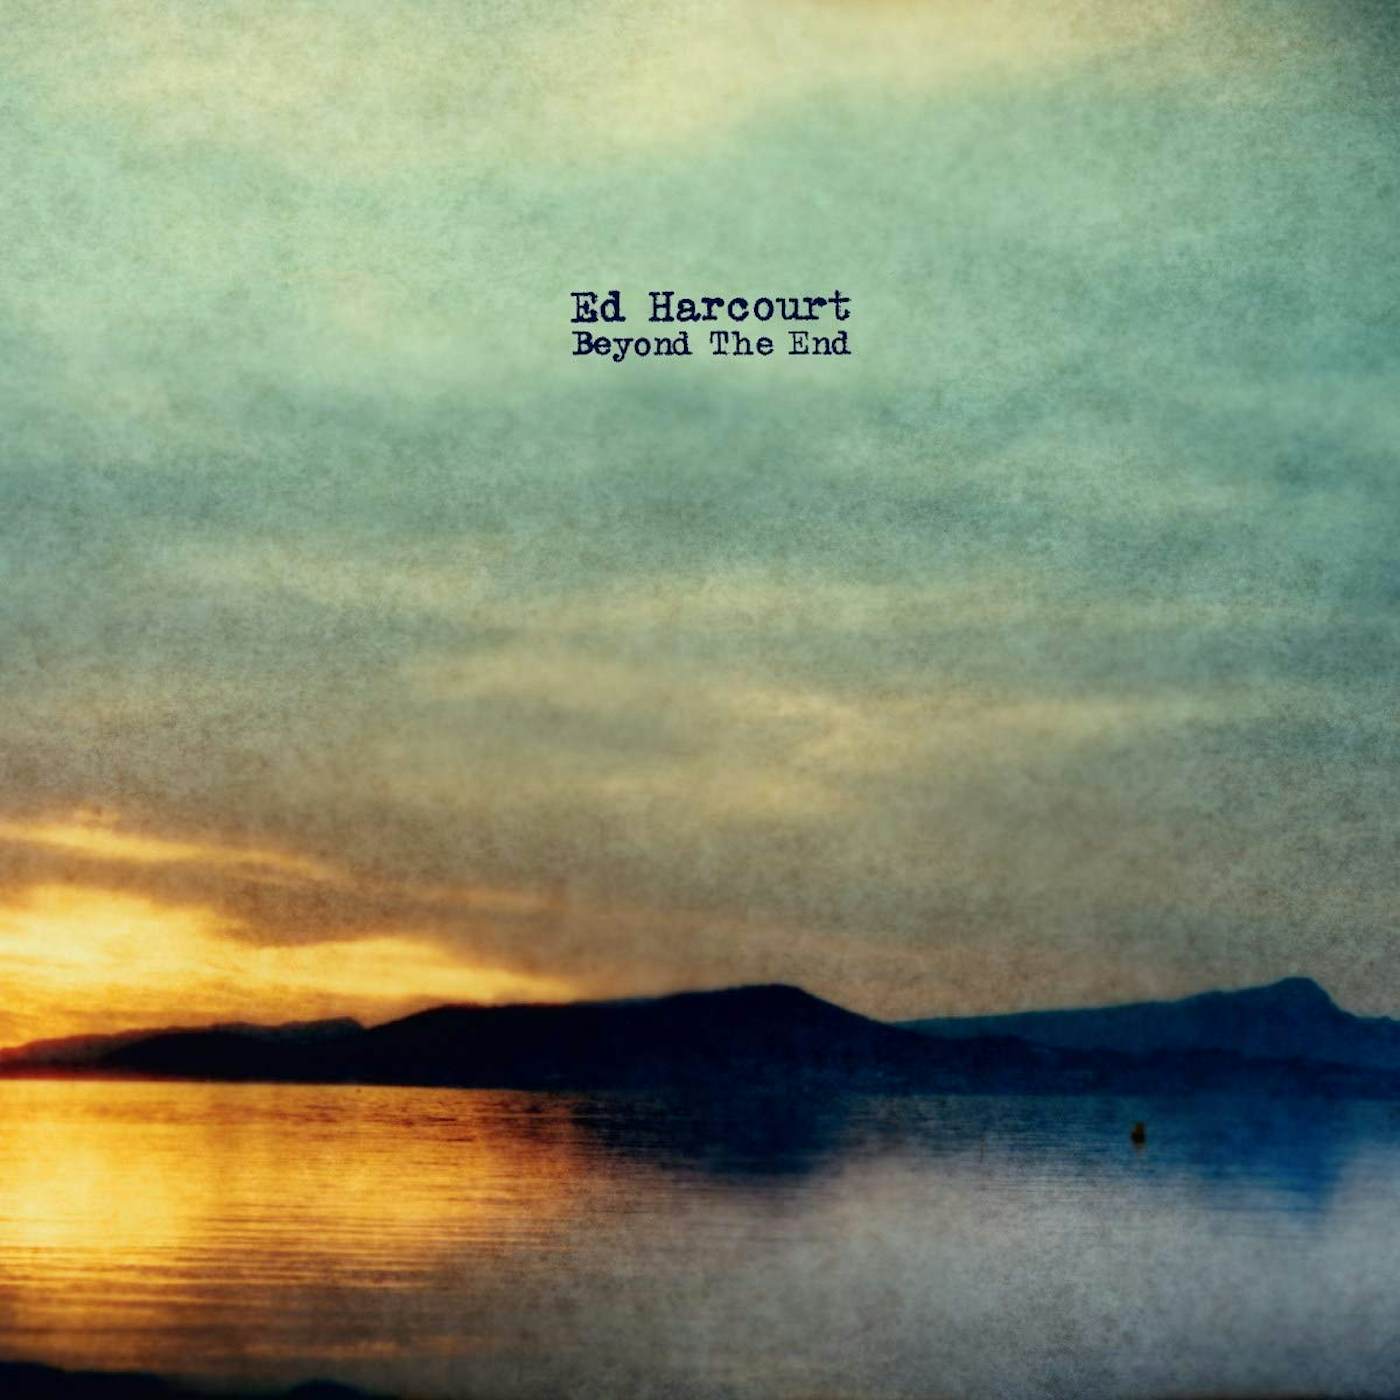 Ed Harcourt BEYOND THE END CD